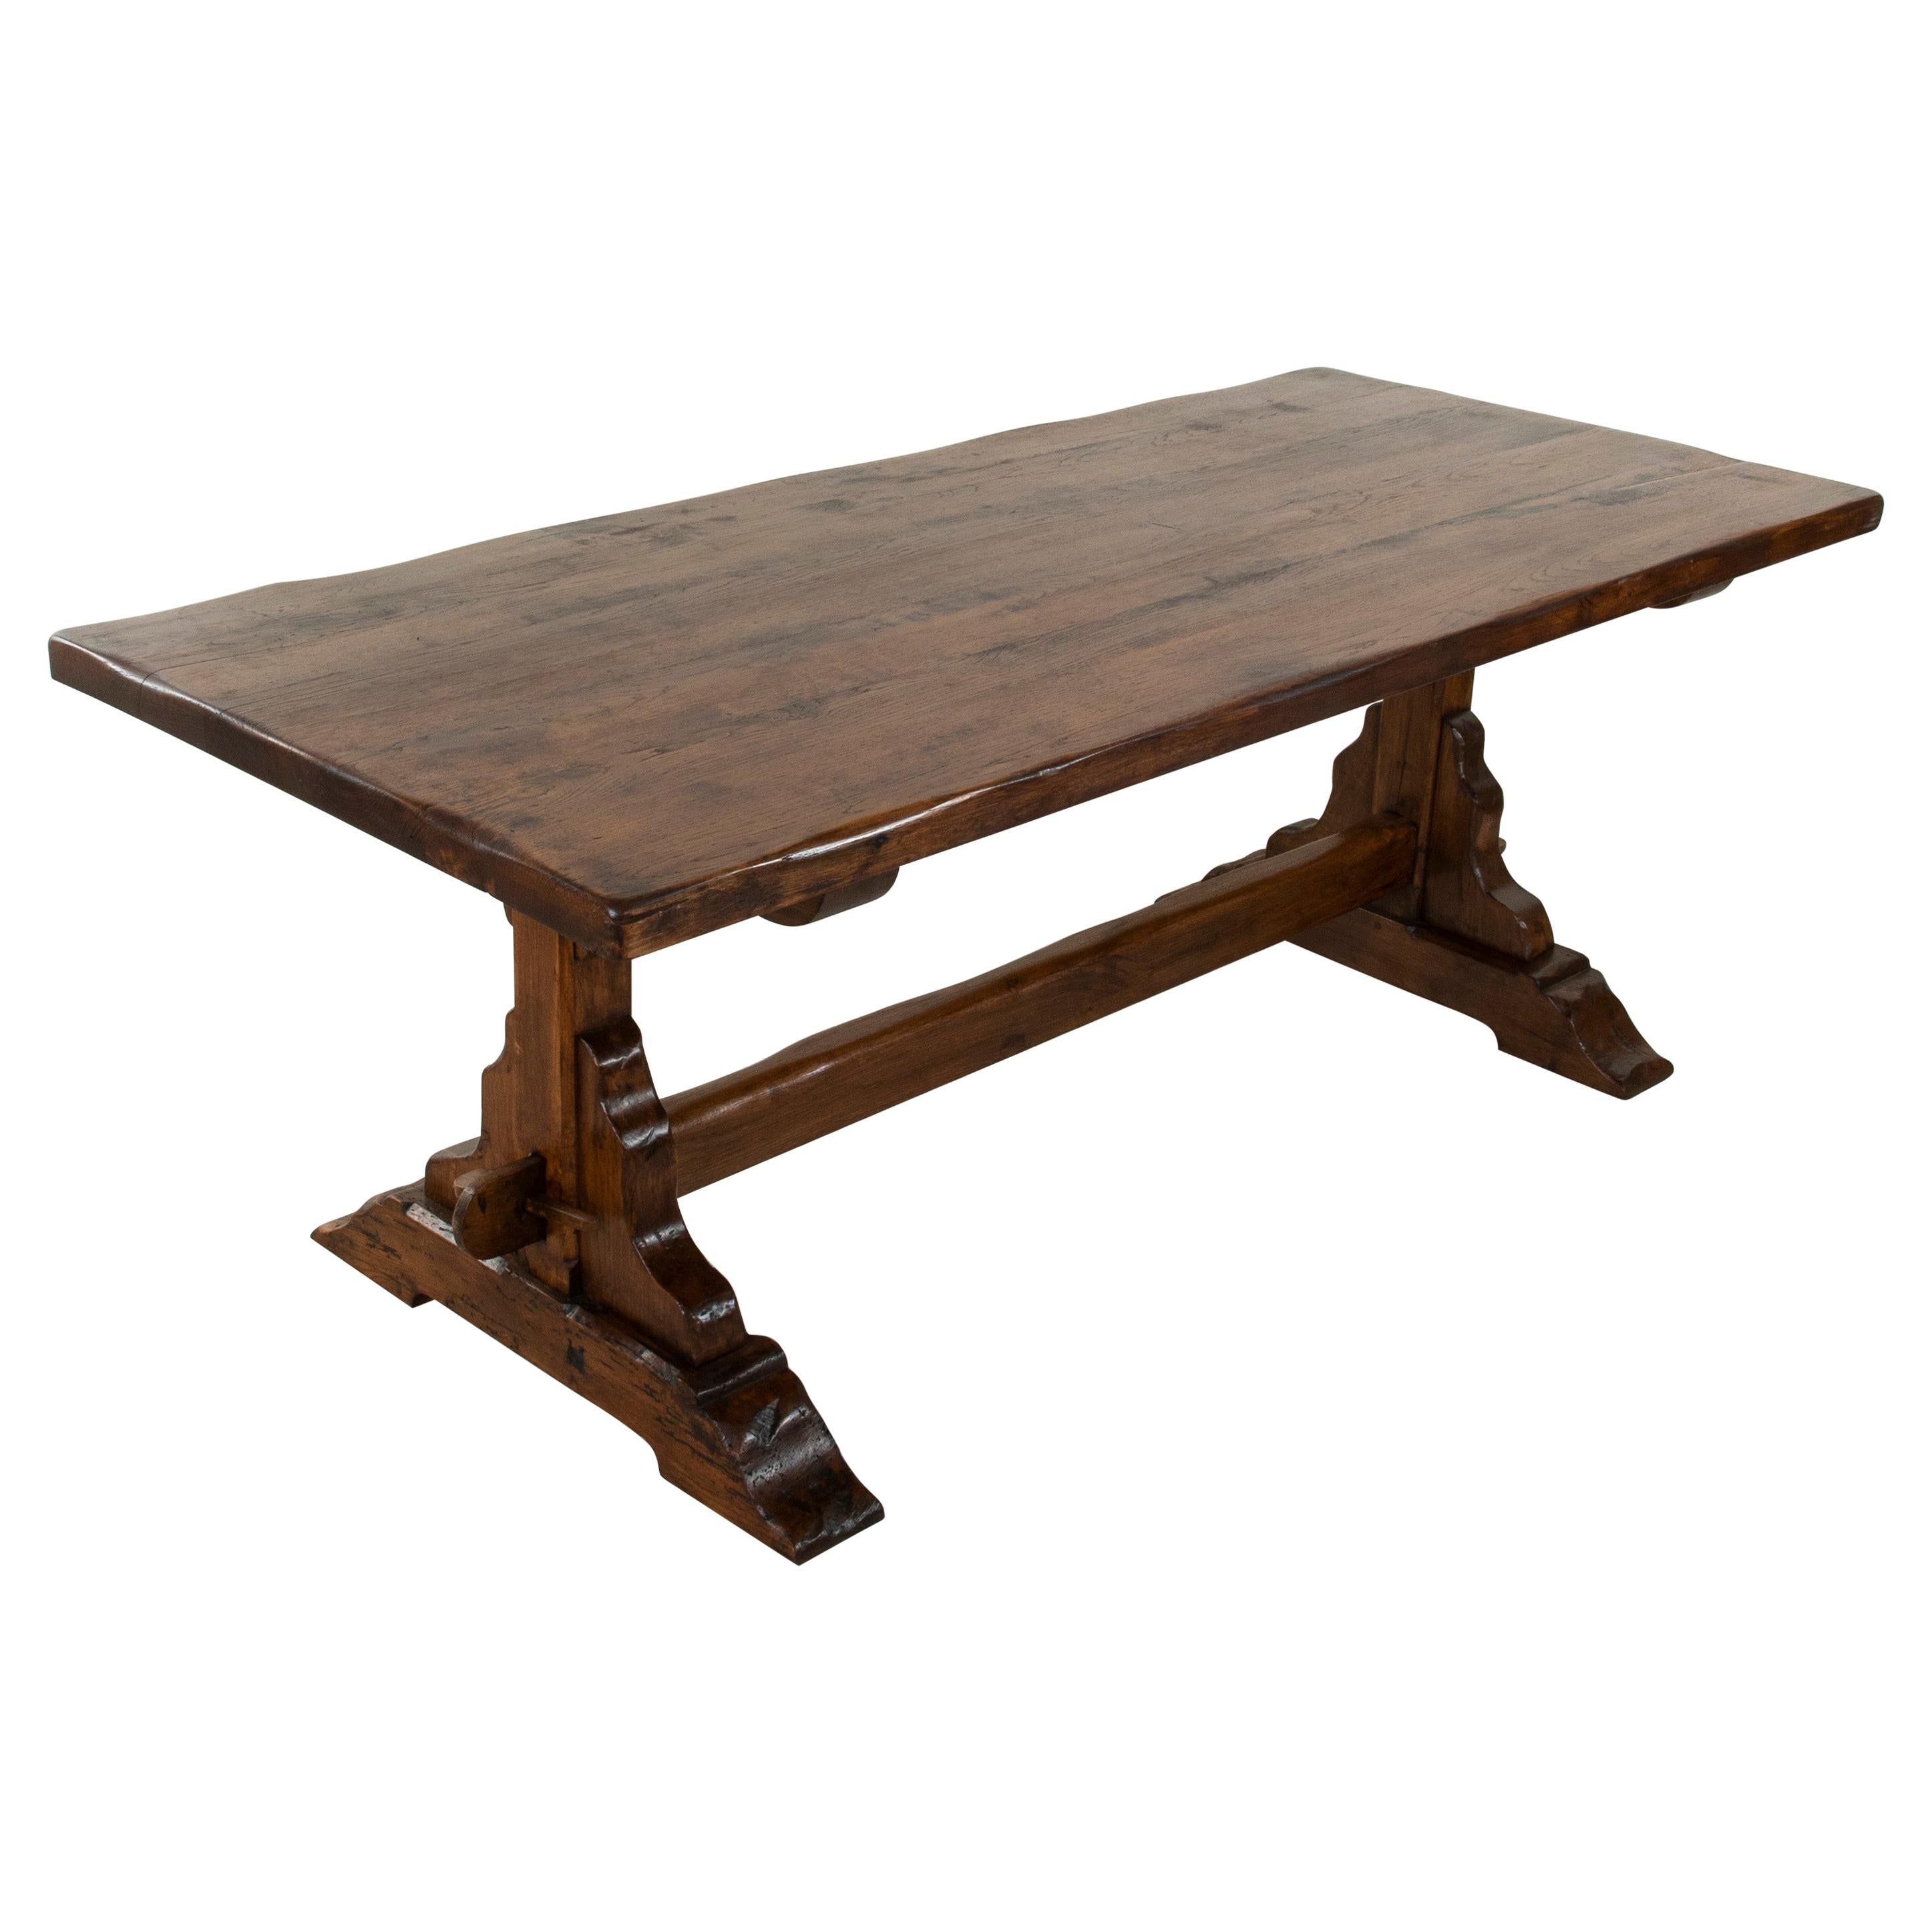 French Artisan-Made Oak Monastery Table, Trestle Dining Table, circa 1930s